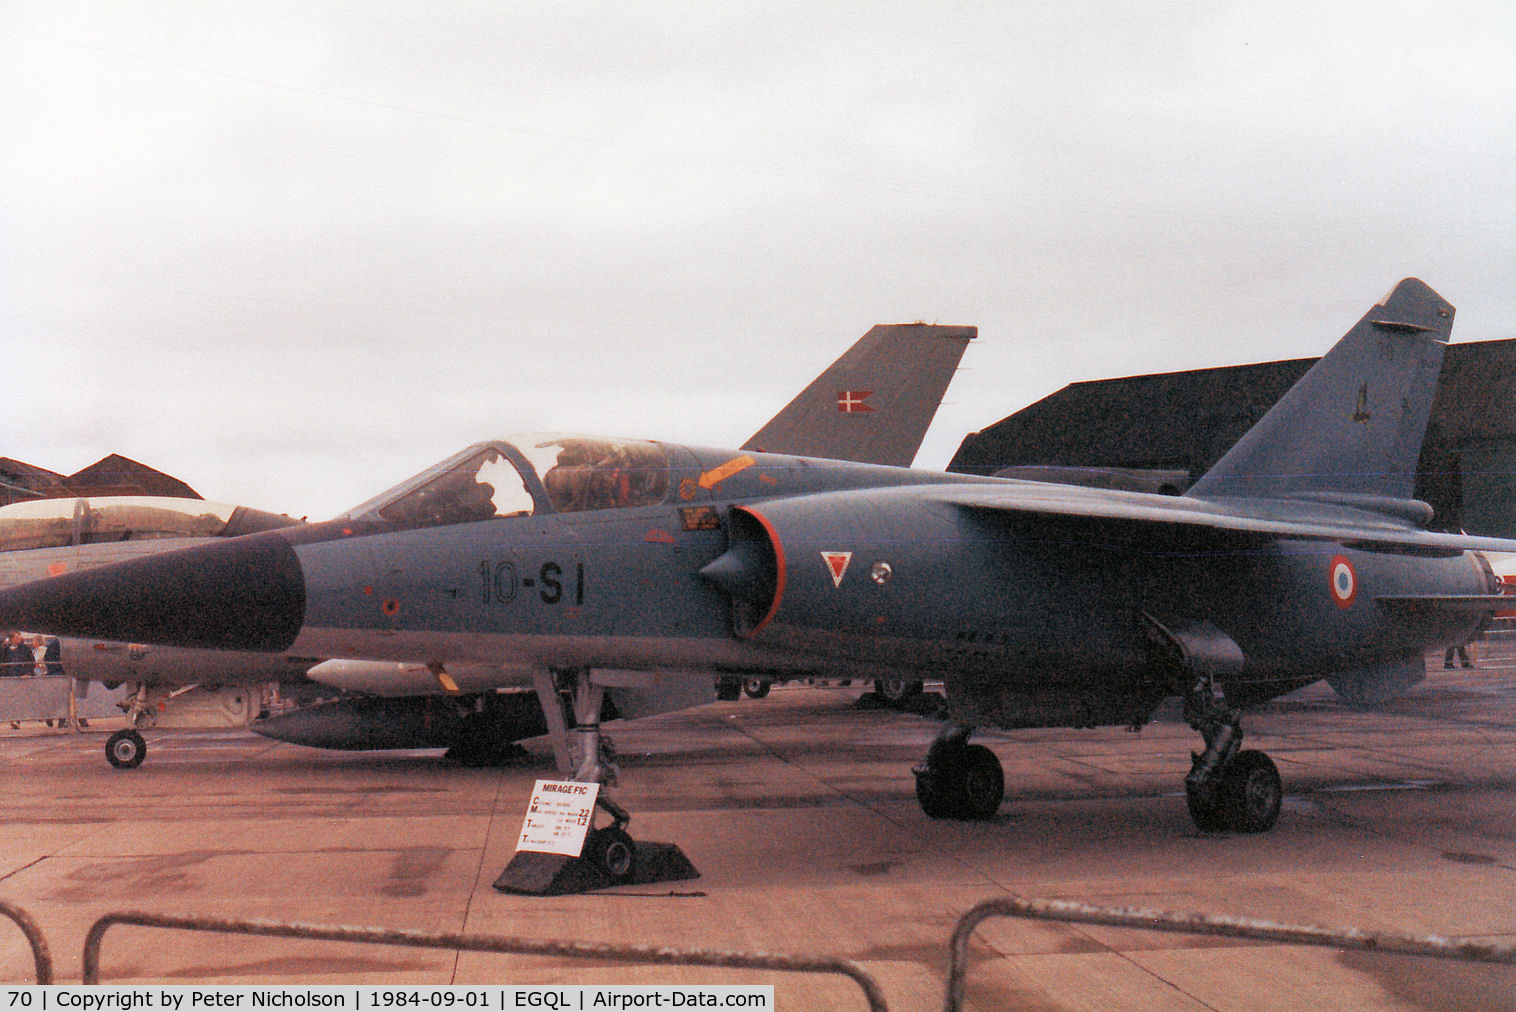 70, Dassault Mirage F.1C C/N 70, Mirage F.1 of French Air Force's EC.10 on display at the 1984 RAF Leuchars Airshow.